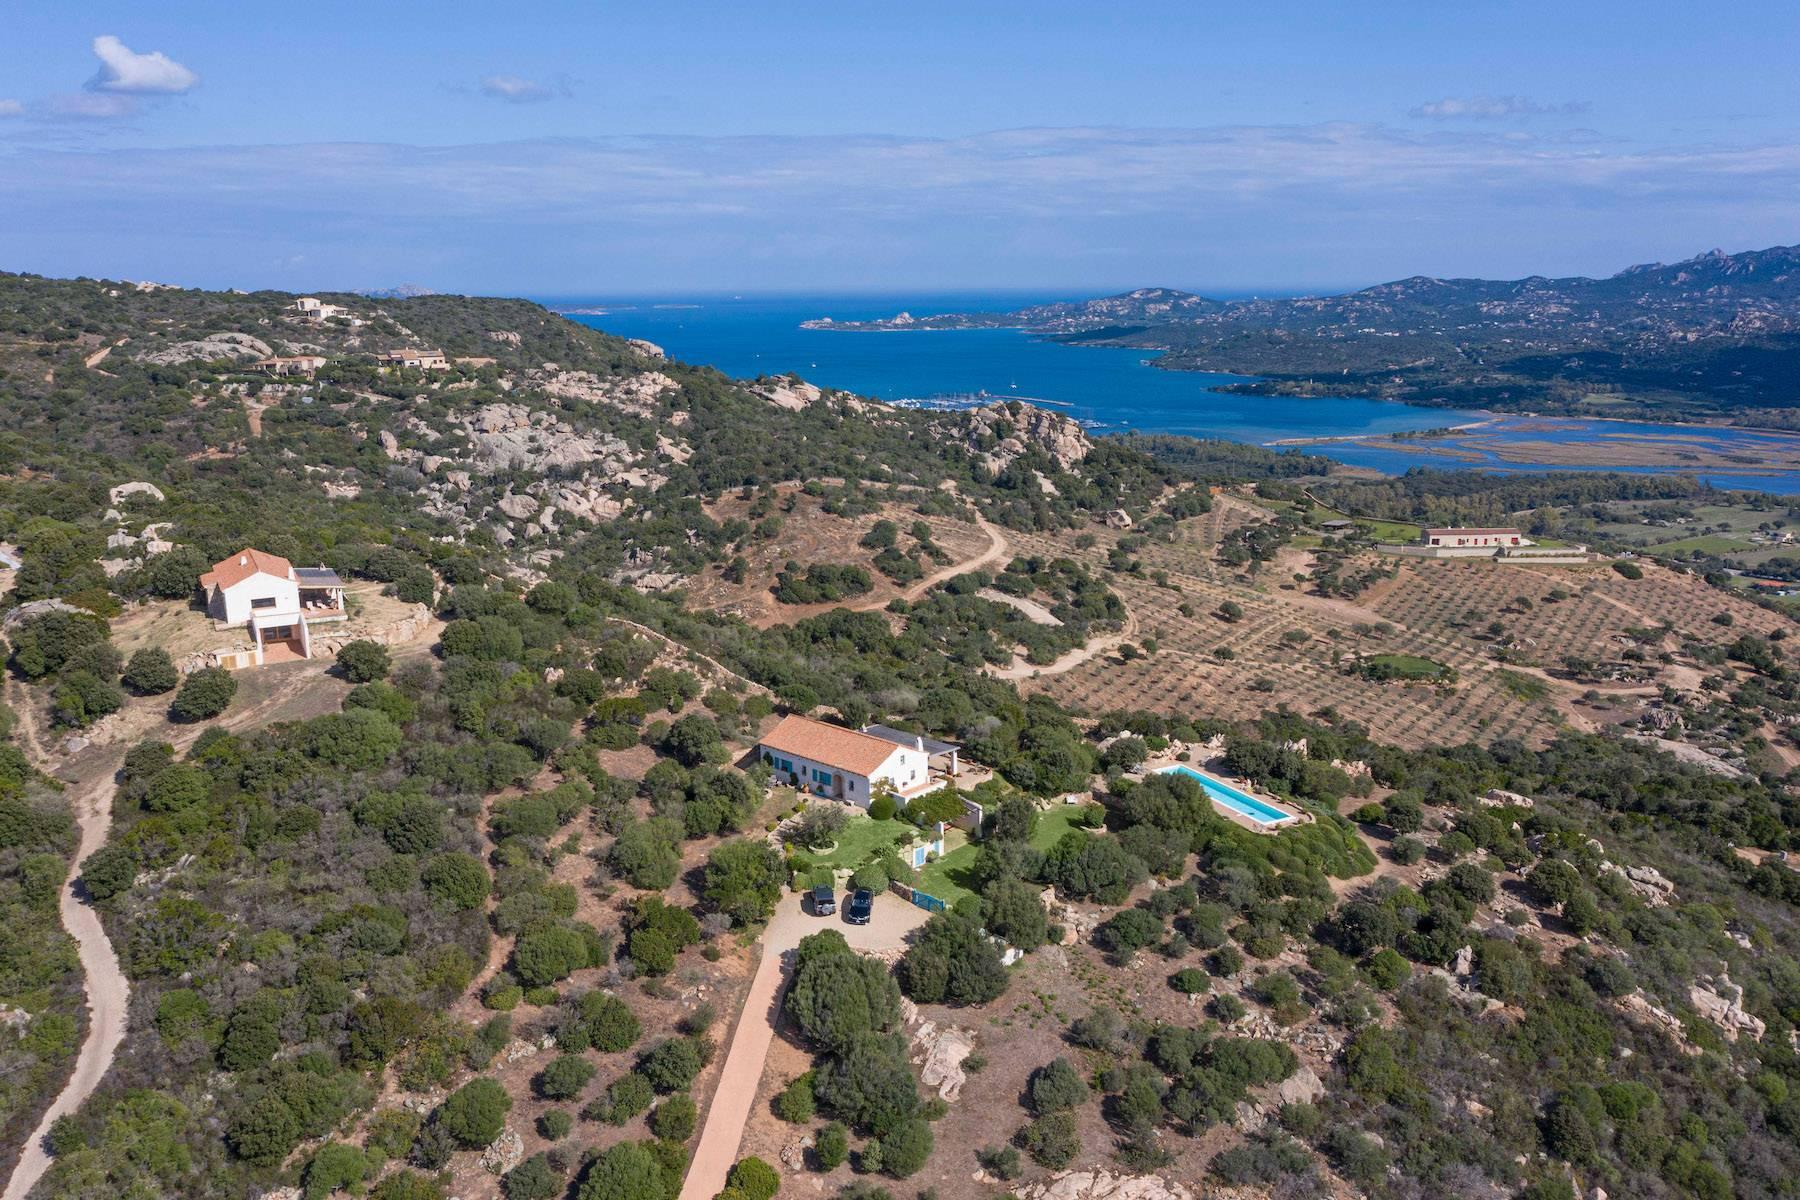 Splendid estate, surrounded by Mediterranean vegetation, overlooking the Gulf of Cannigione - 2